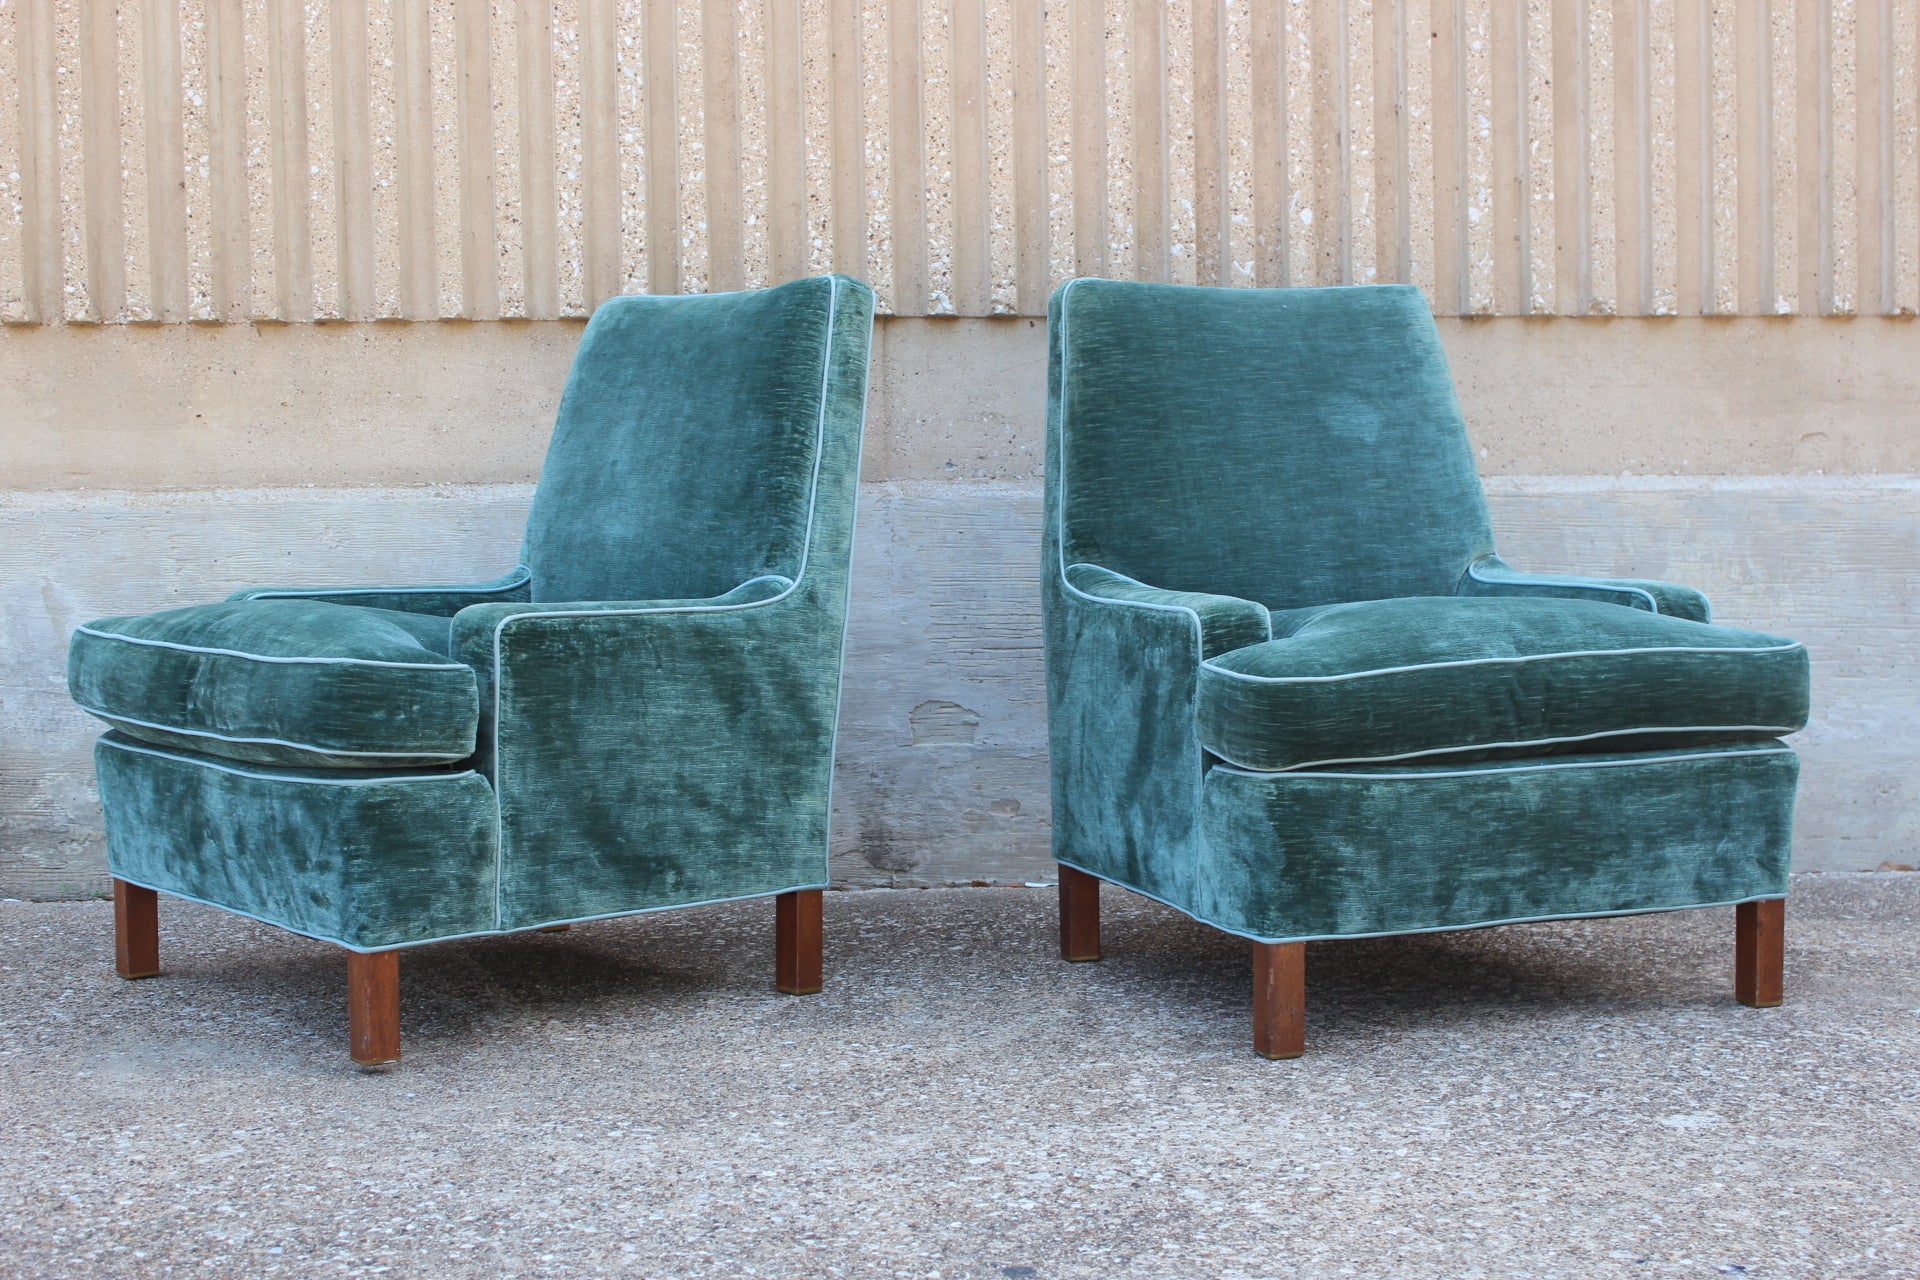 Pair of Low Arm Lounge Chairs by Edward Wormley for Dunbar